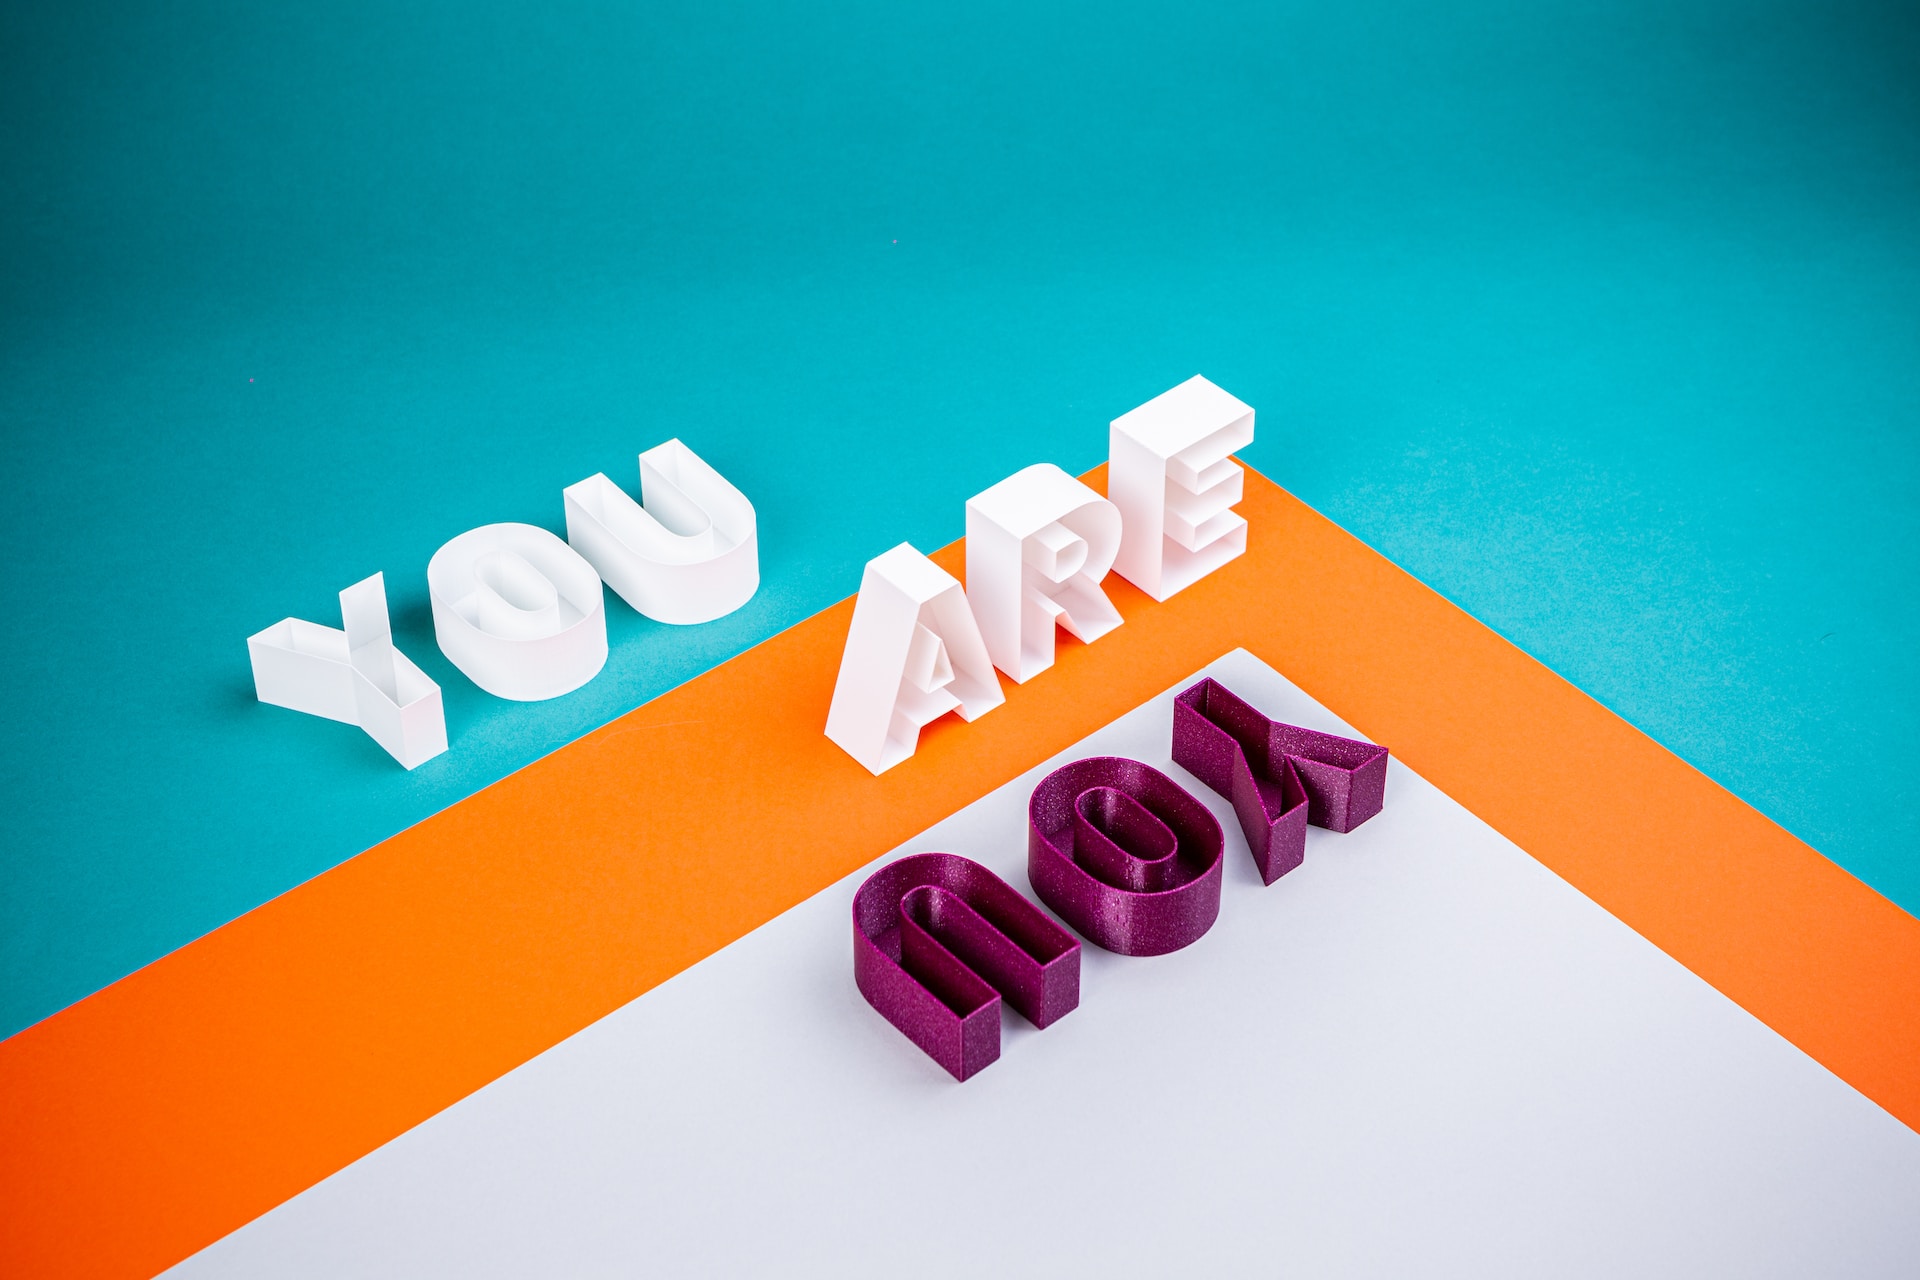 How to Make Text 3D in Illustrator